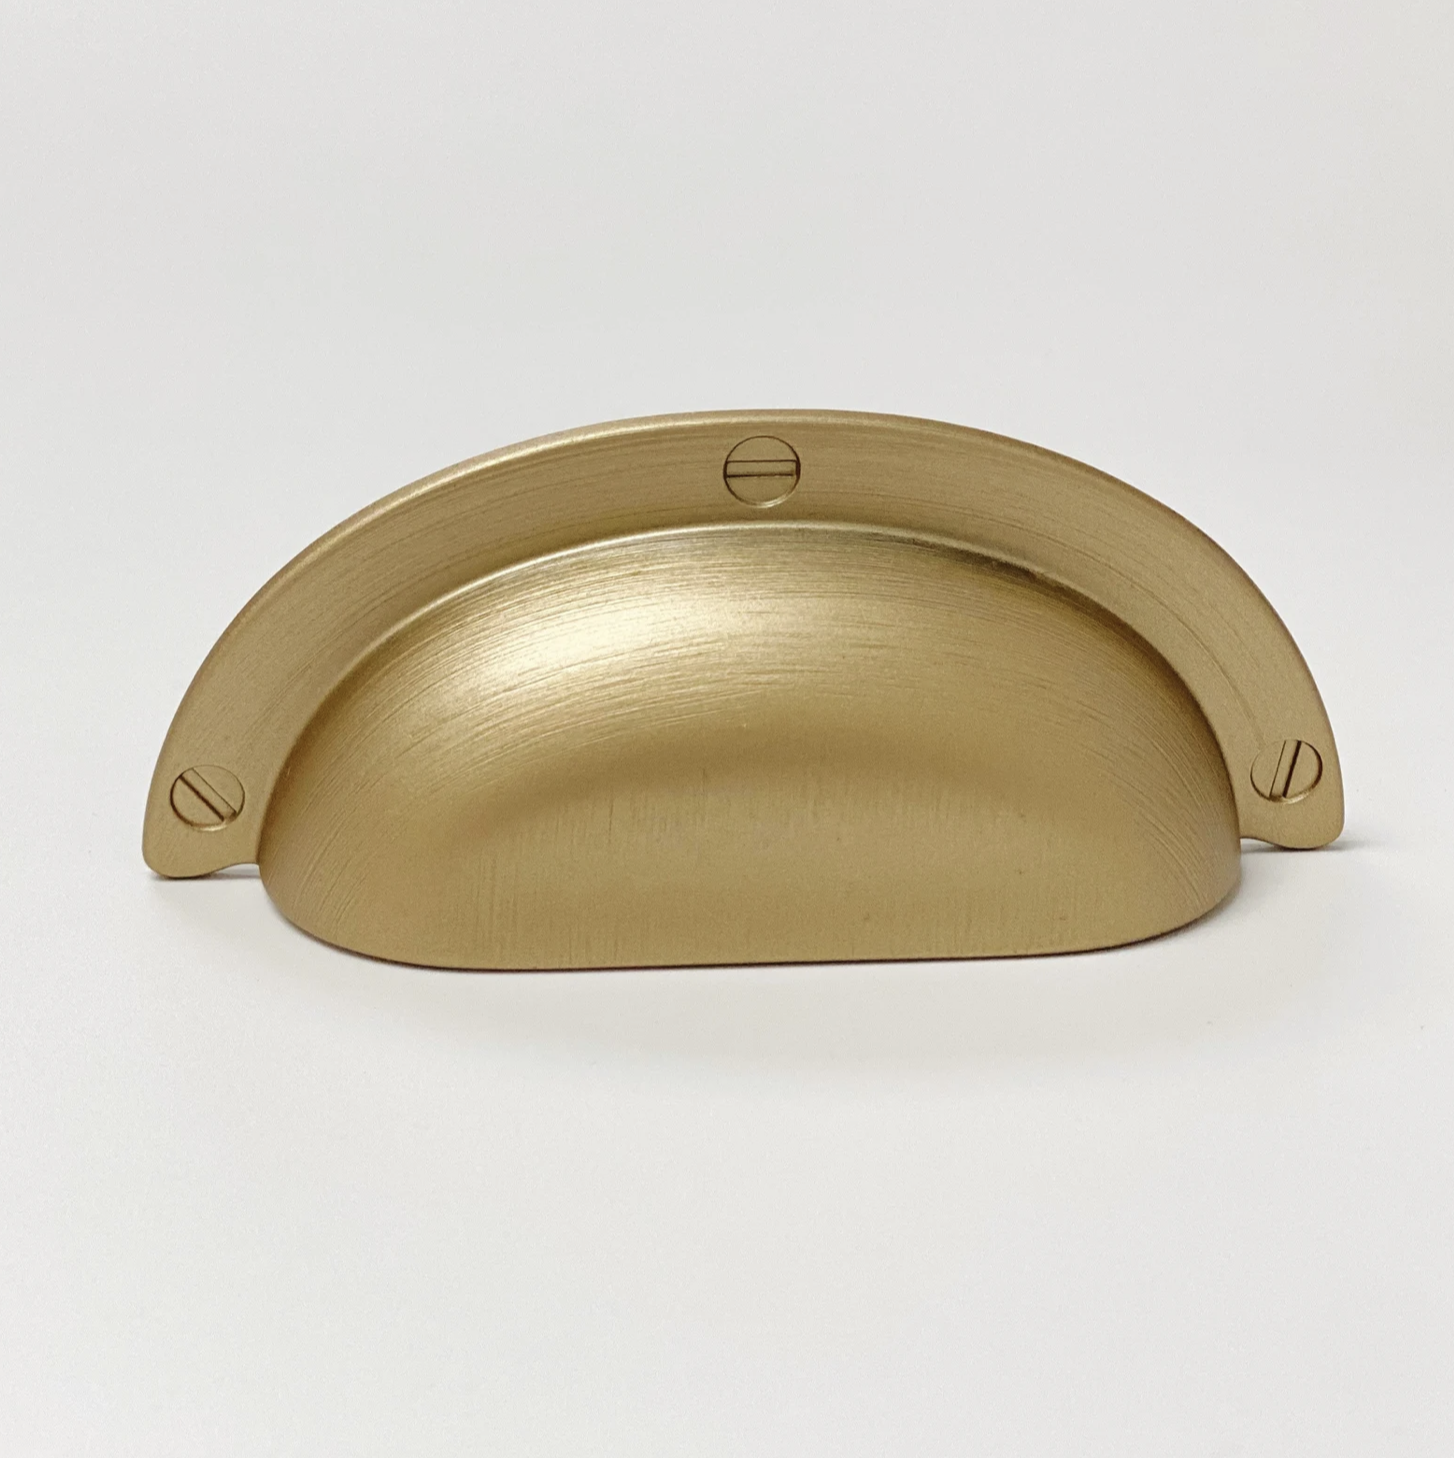 Brushed Gold "Capri" Cup Drawer Pull, Ring Pull or Round Cabinet Knob | Pulls